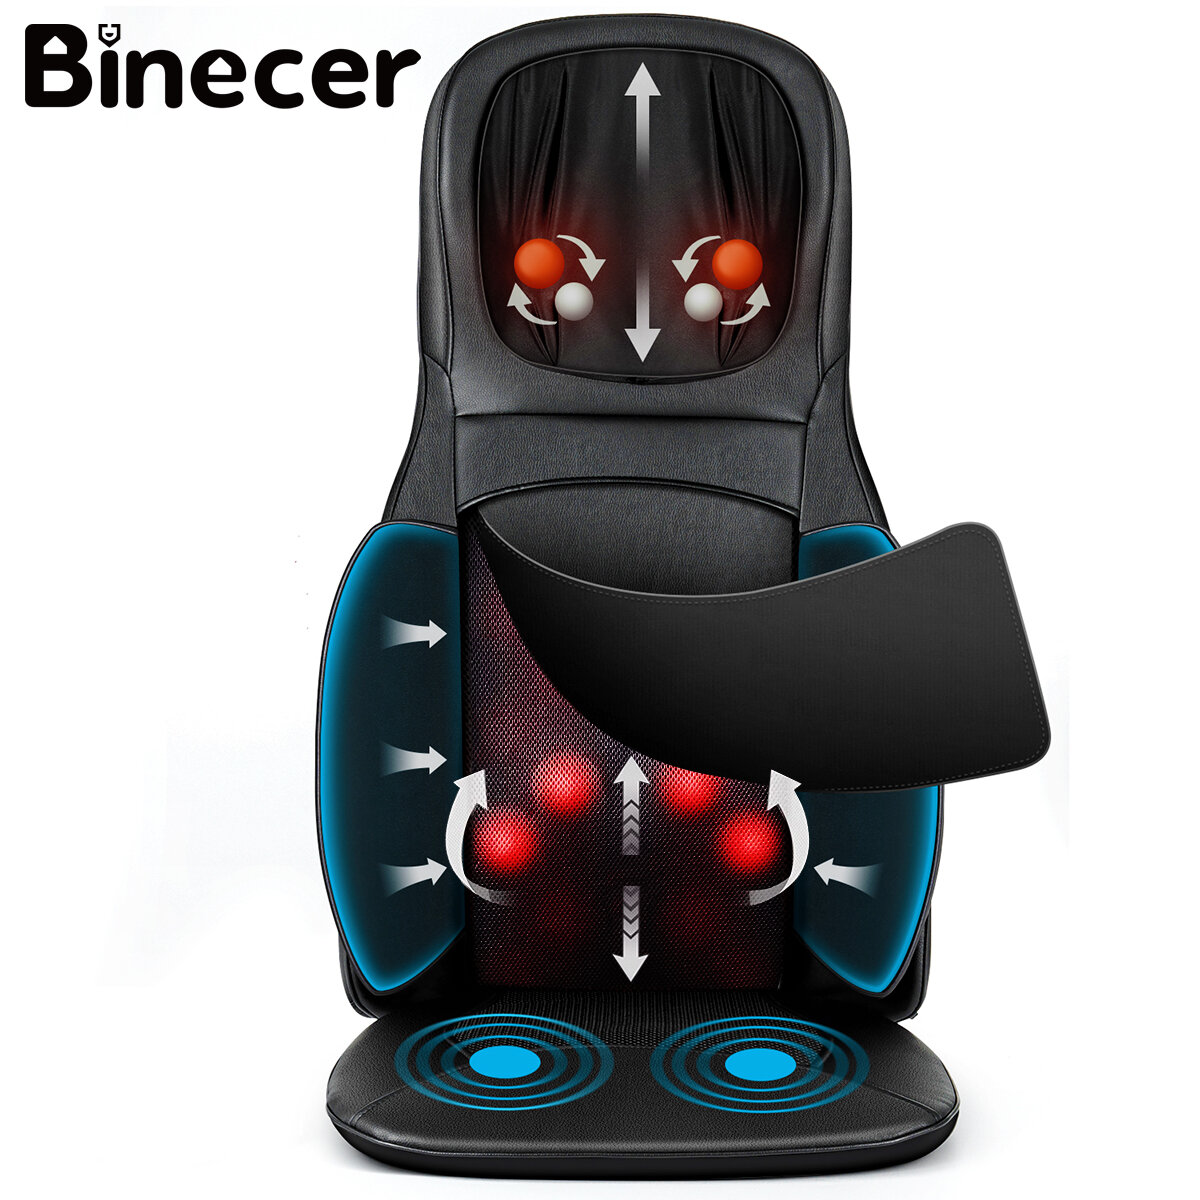 best price,binecer,mp1.2,neck,back,massager,with,heat,eu,coupon,price,discount